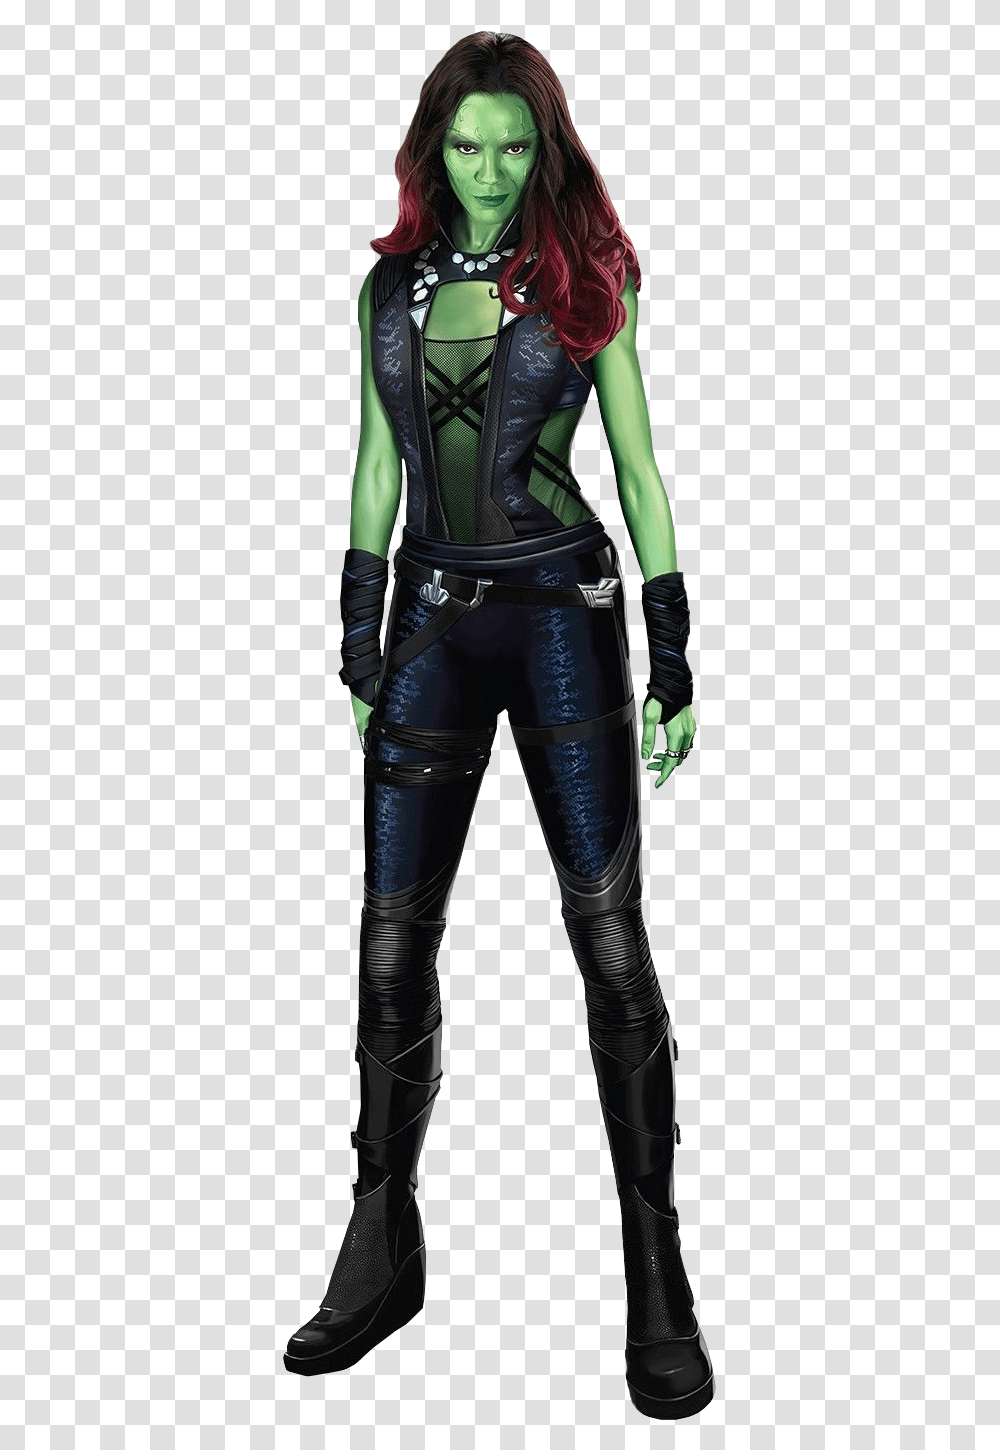 Download Gamora Promo Gamora Outfit Guardians Of The Galaxy, Costume, Person, Helmet Transparent Png